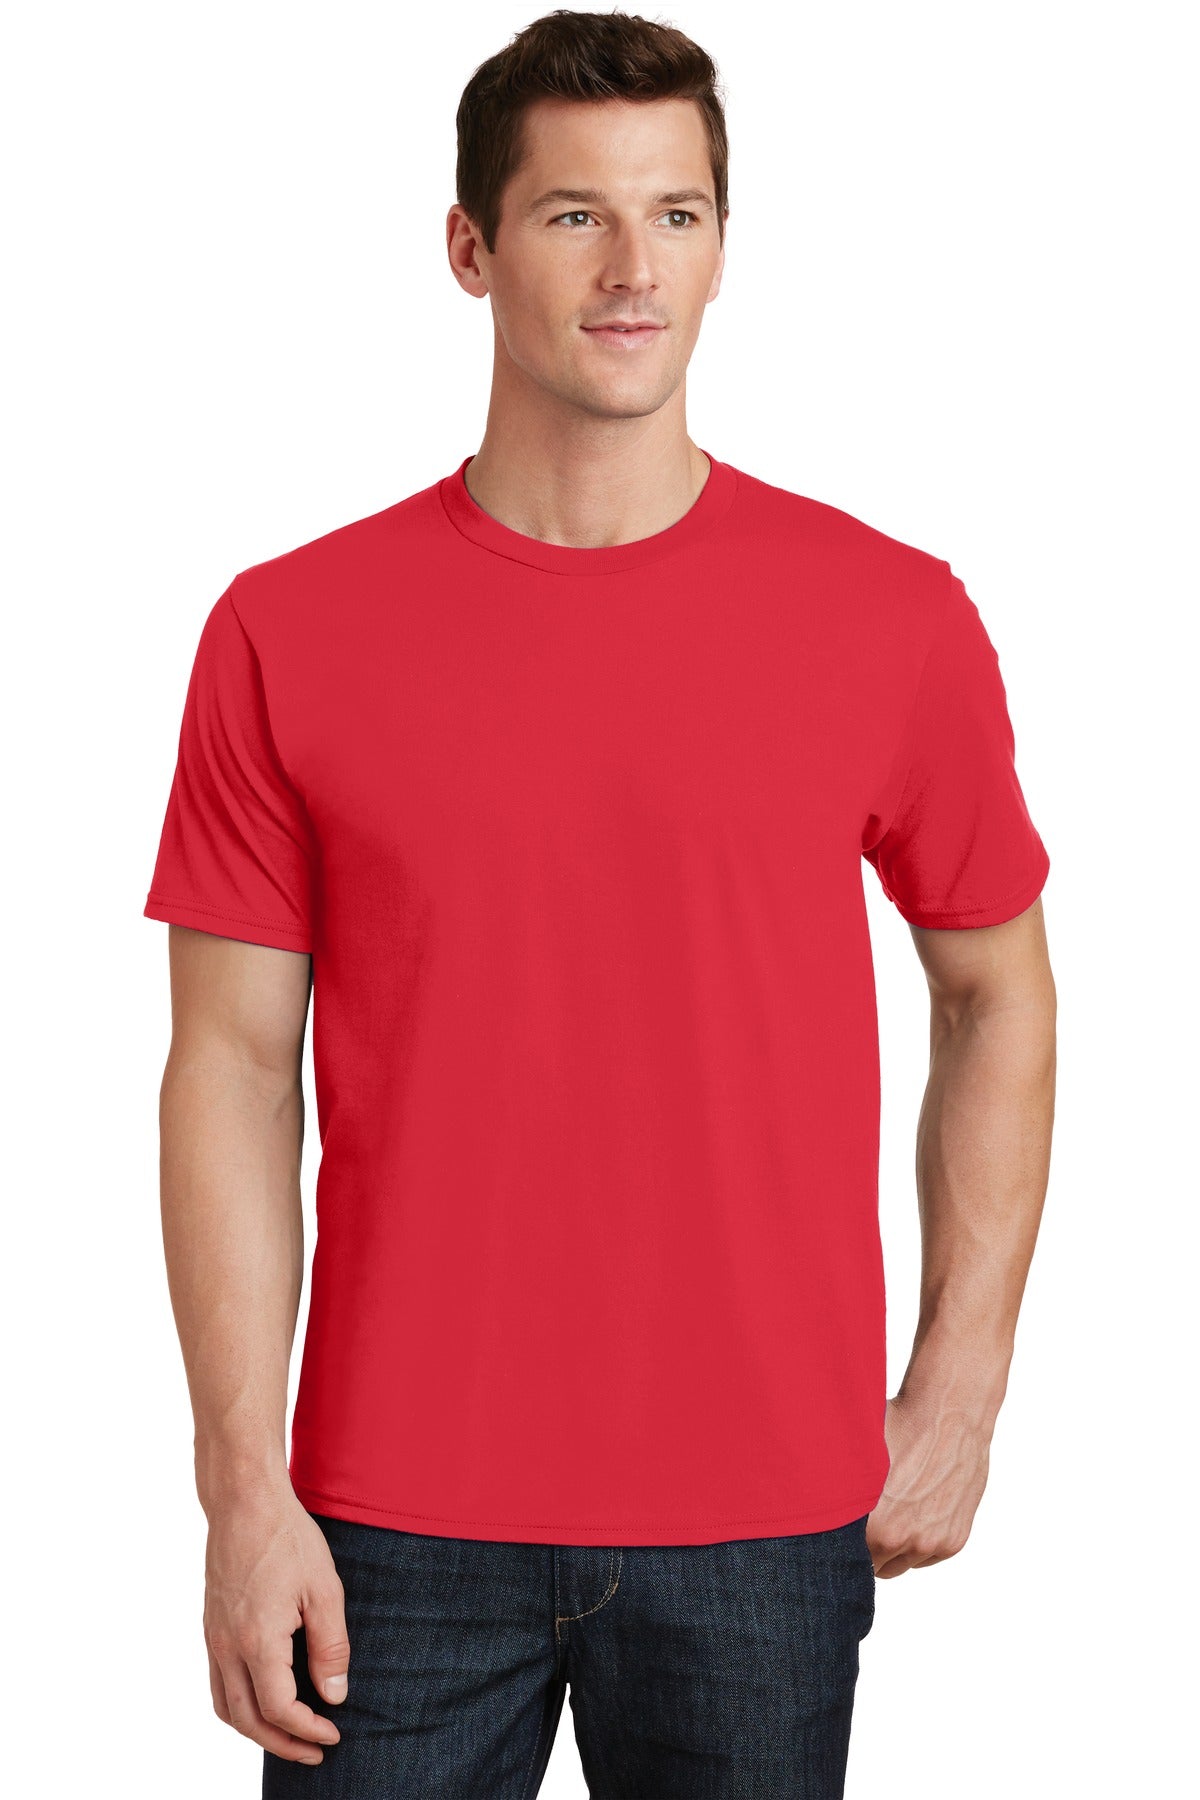 Port & Company® Fan Favorite Tee. PC450 [Athletic Red] - DFW Impression